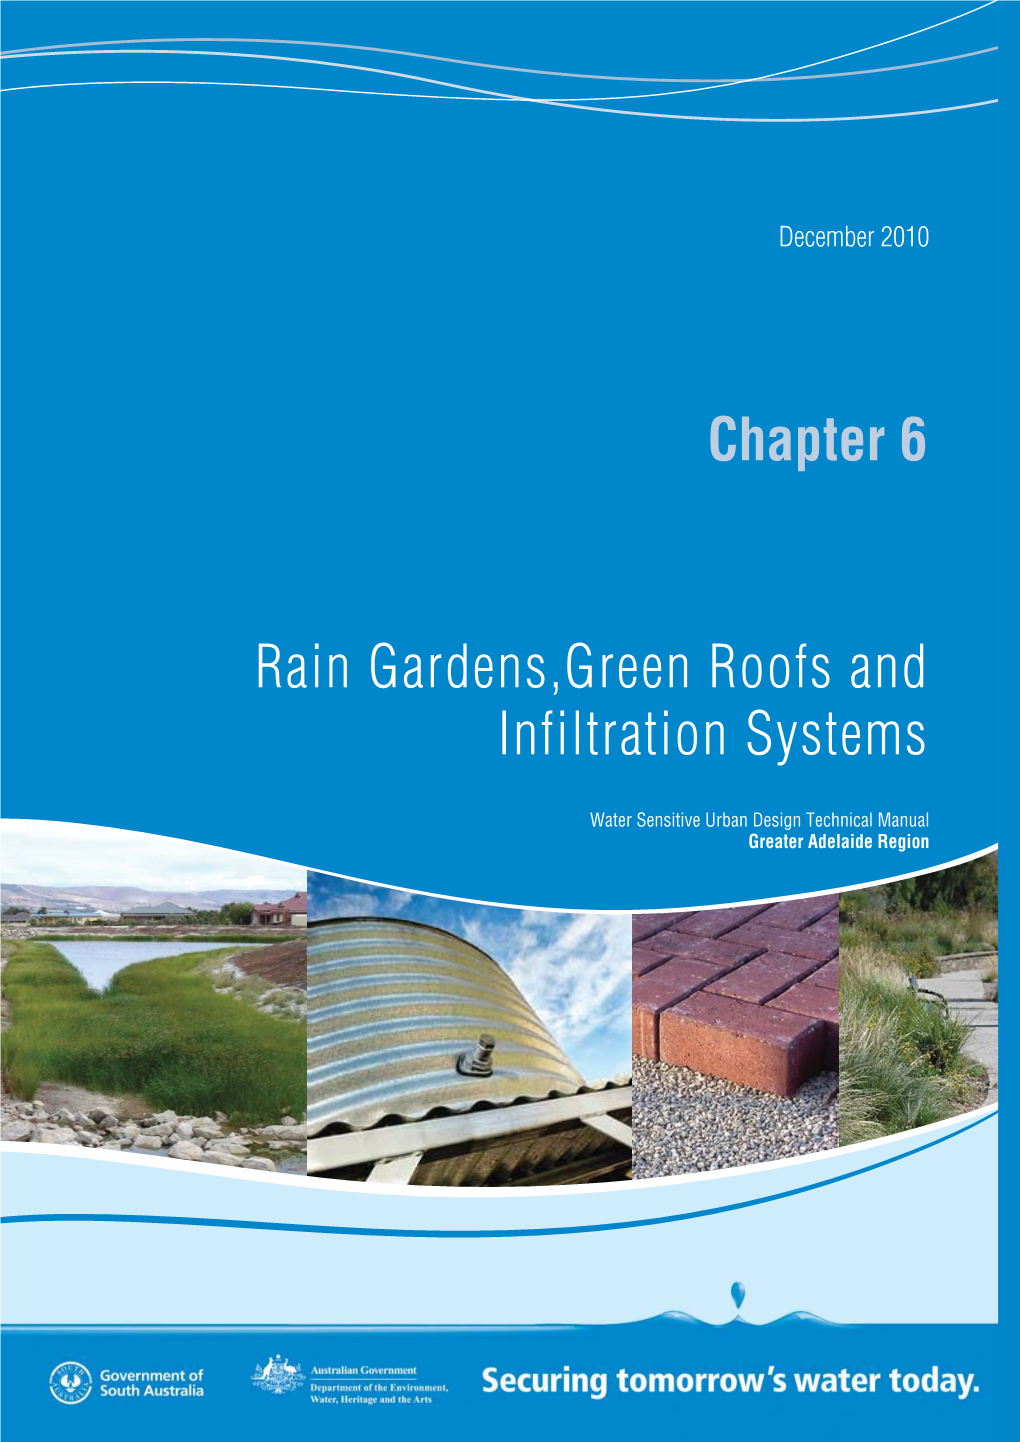 Rain Gardens,Green Roofs and Infiltration Systems Chapter 6